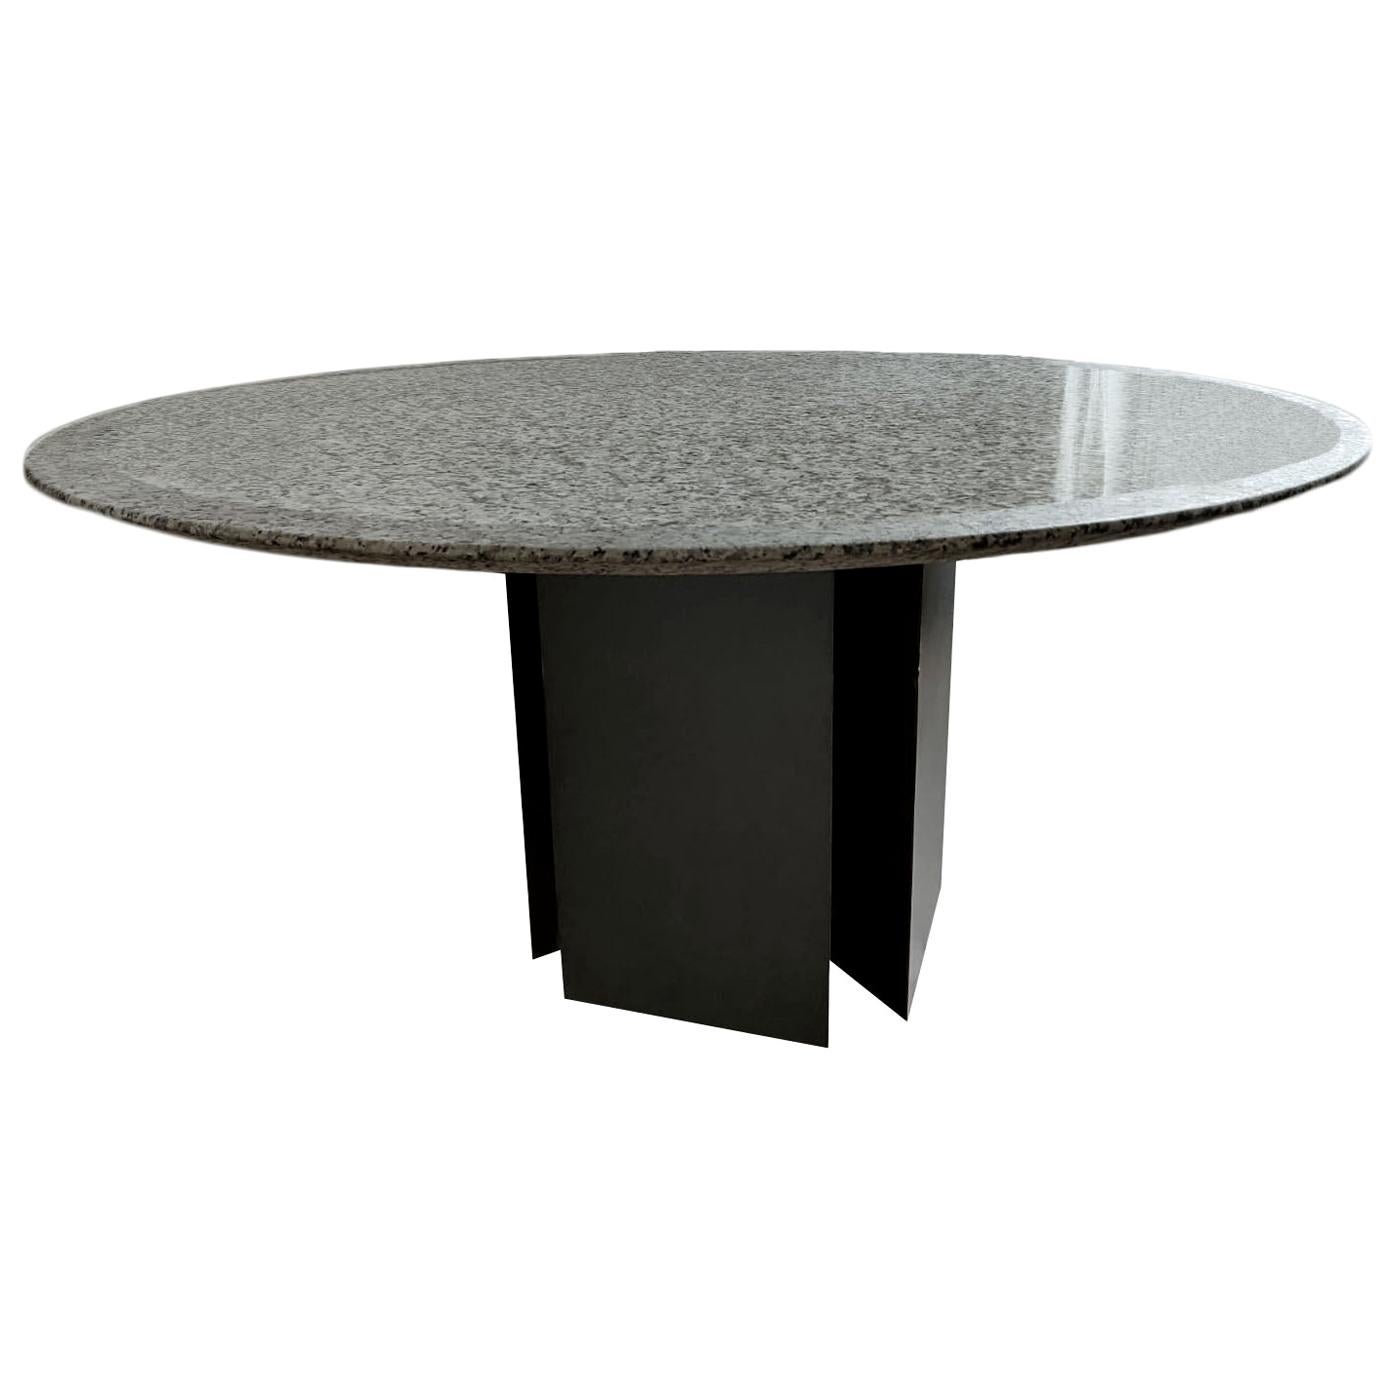 Table in Granite and Metallic Grey Lacquered Wood, 1970s